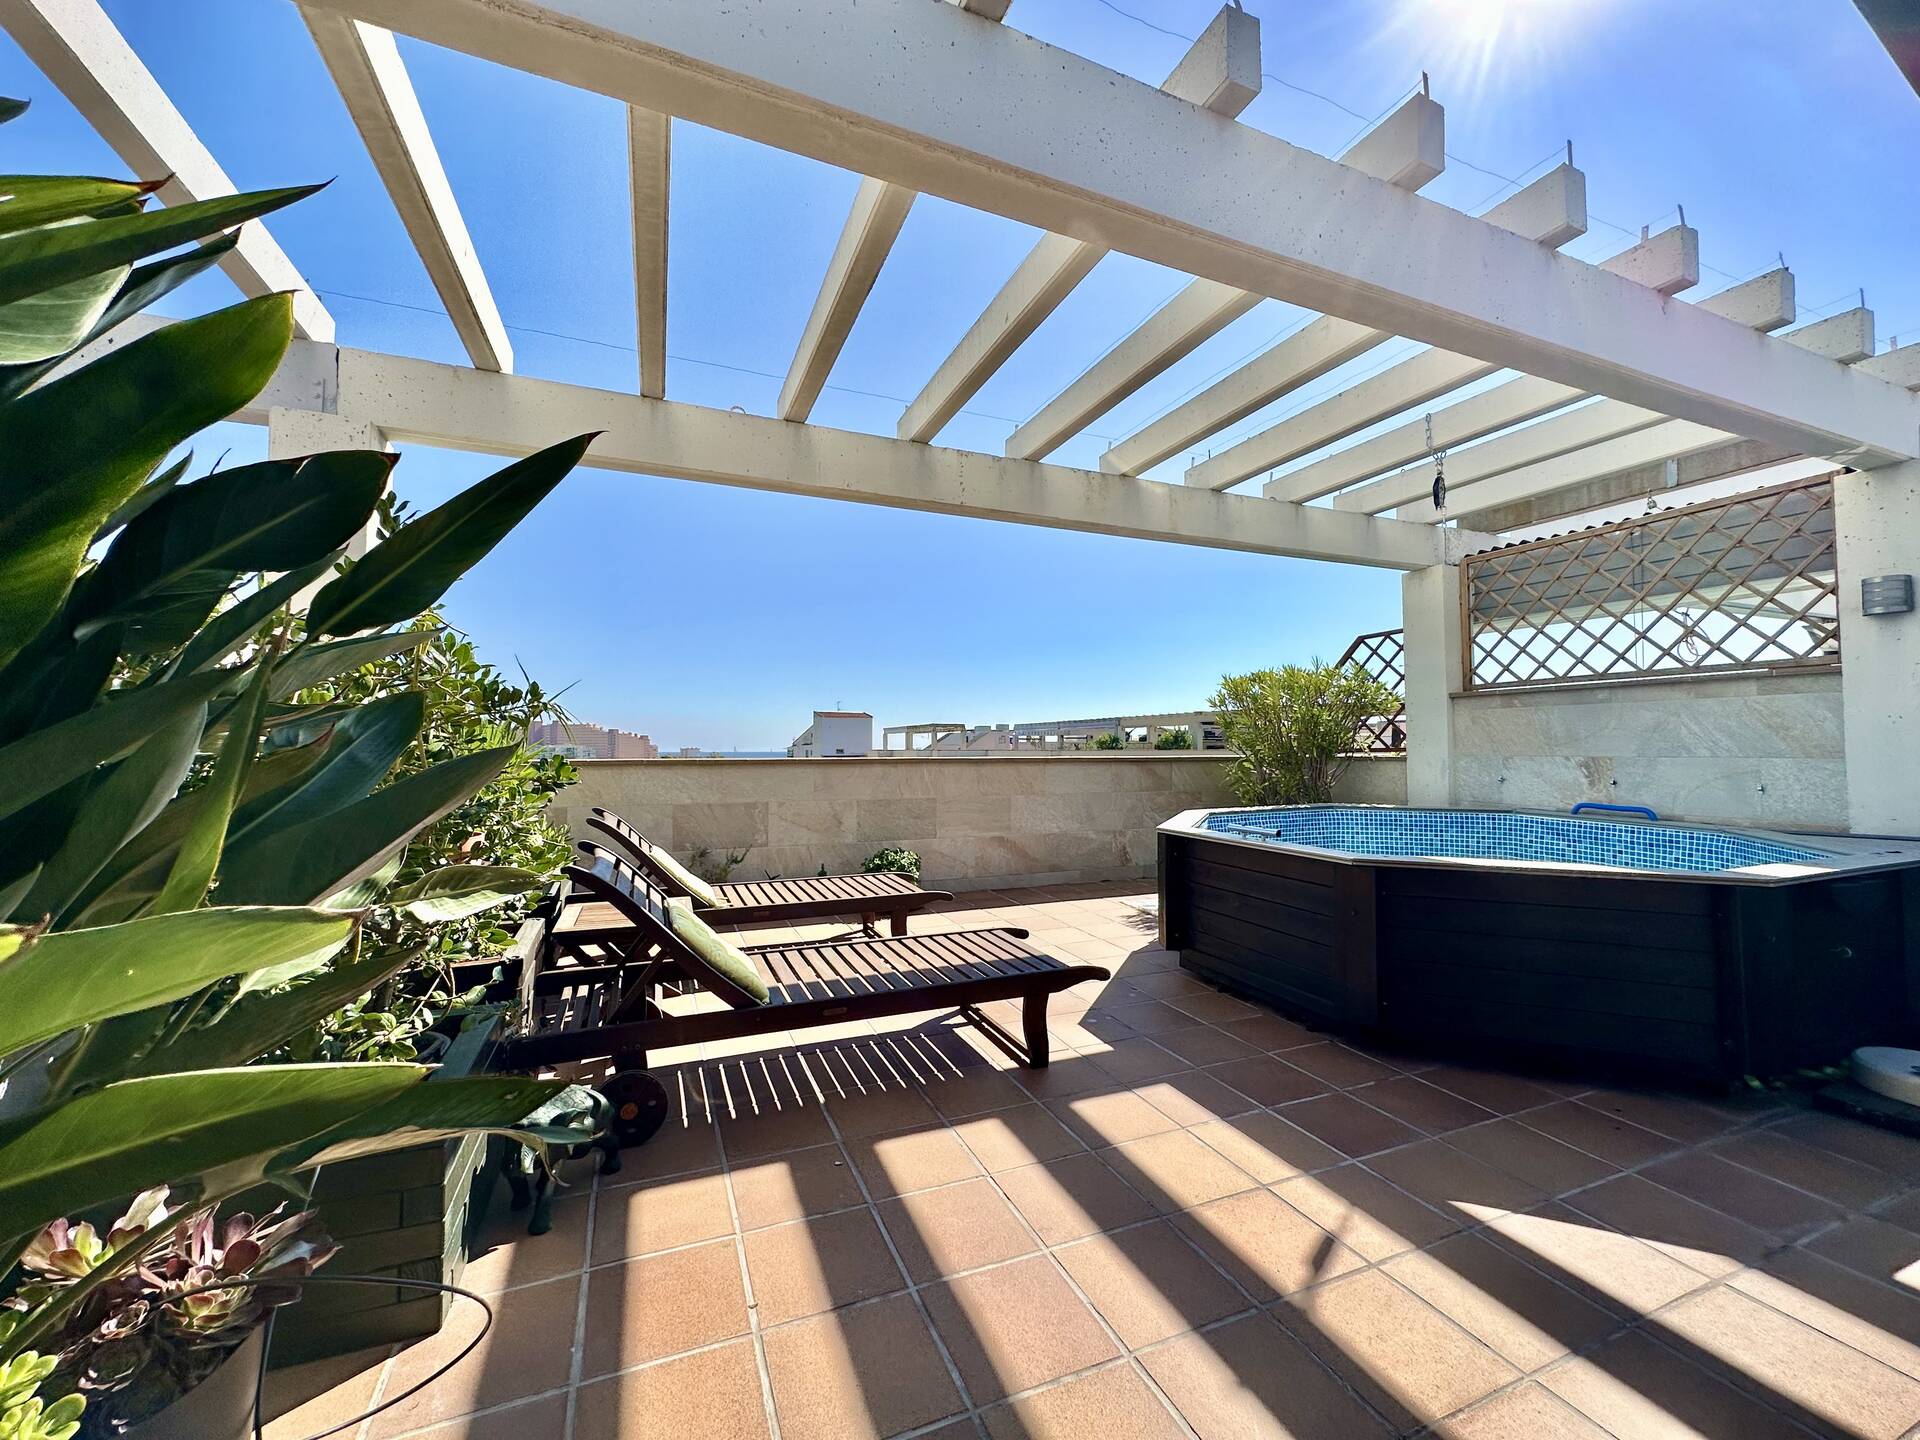 Penthouse apartment with jacuzzi & pool, for sale in Rosas - Santa Margarita